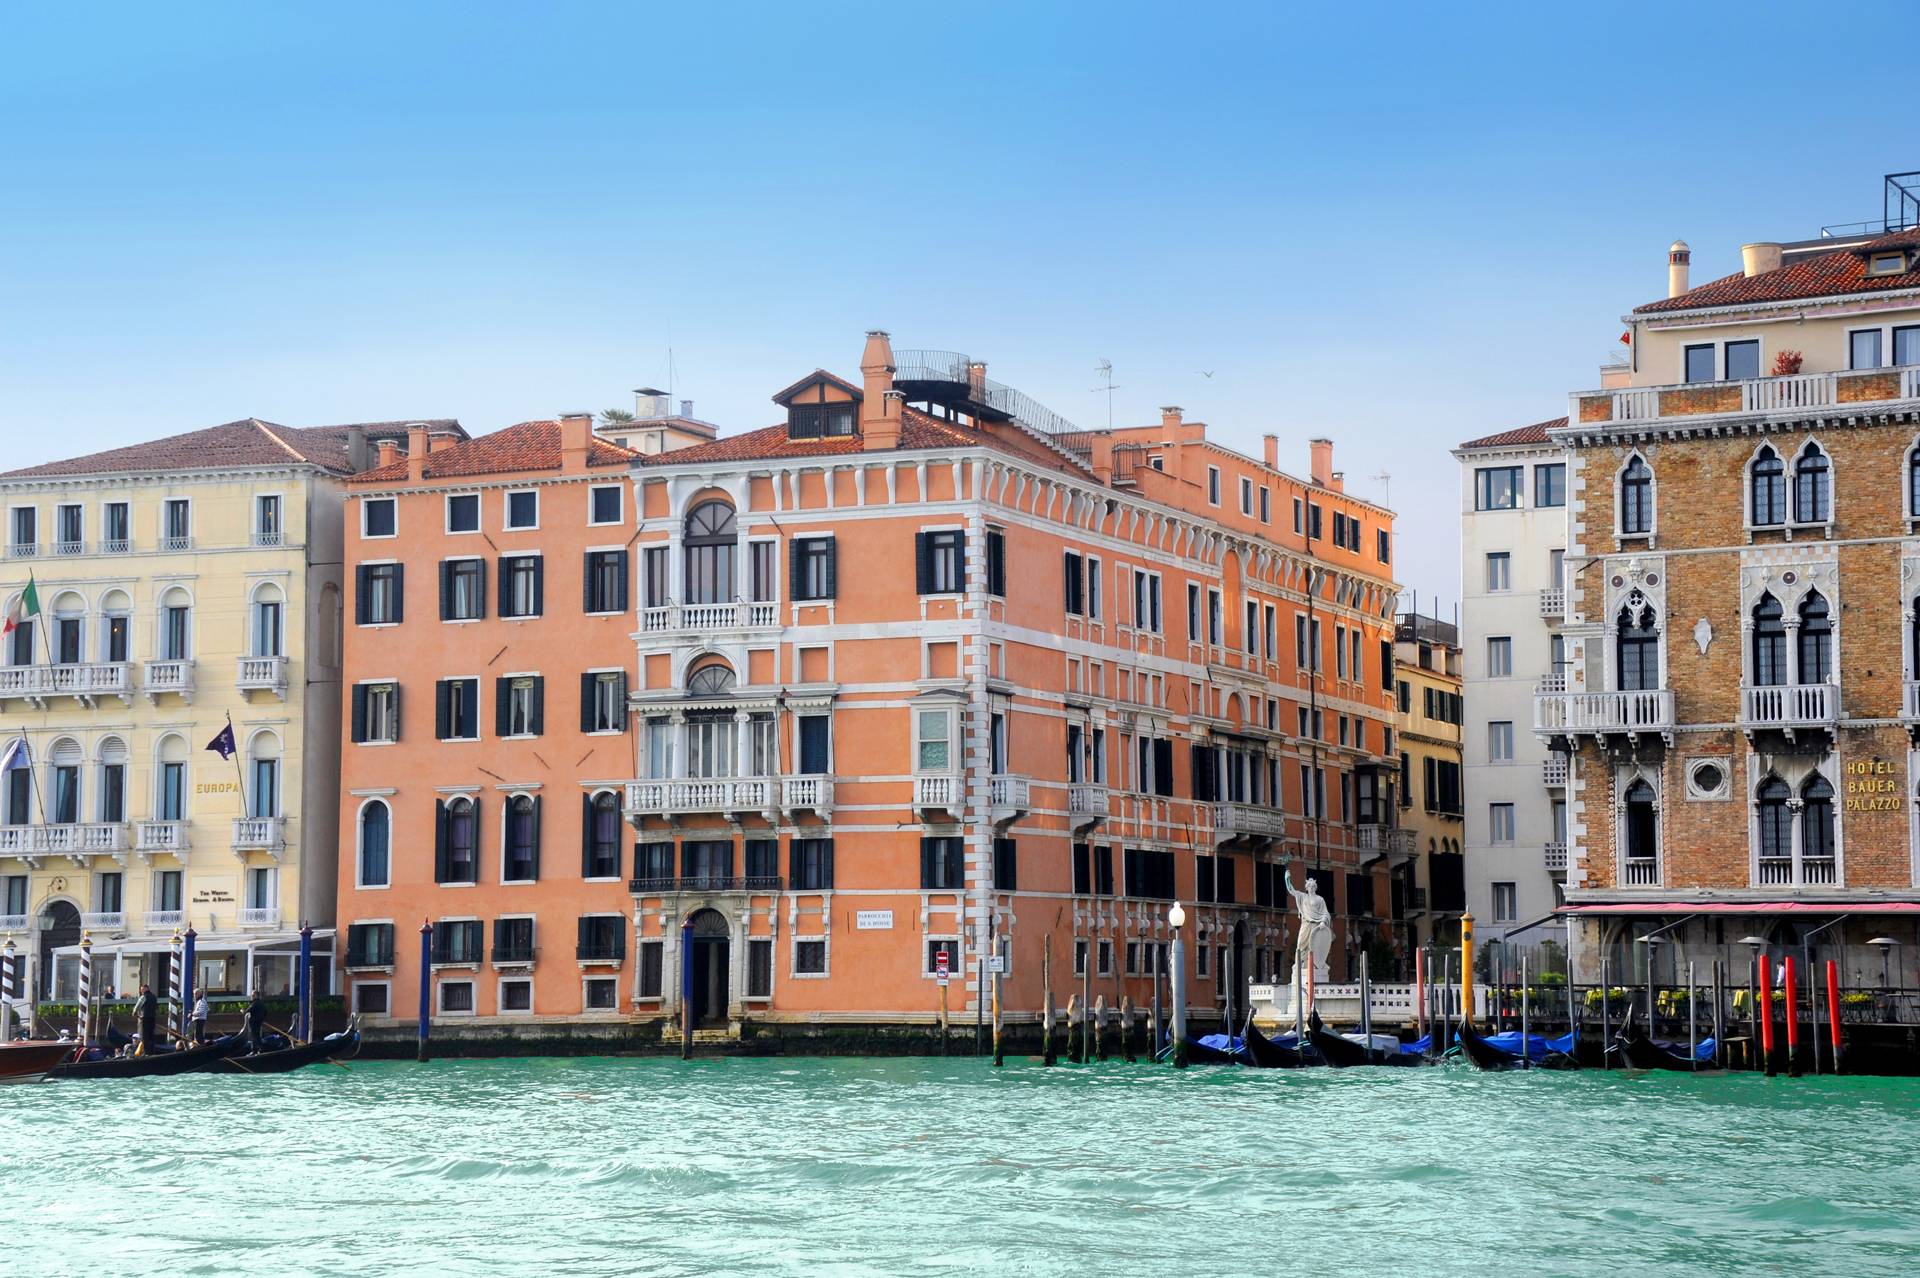 view of the Palazzo from the Grand Canal